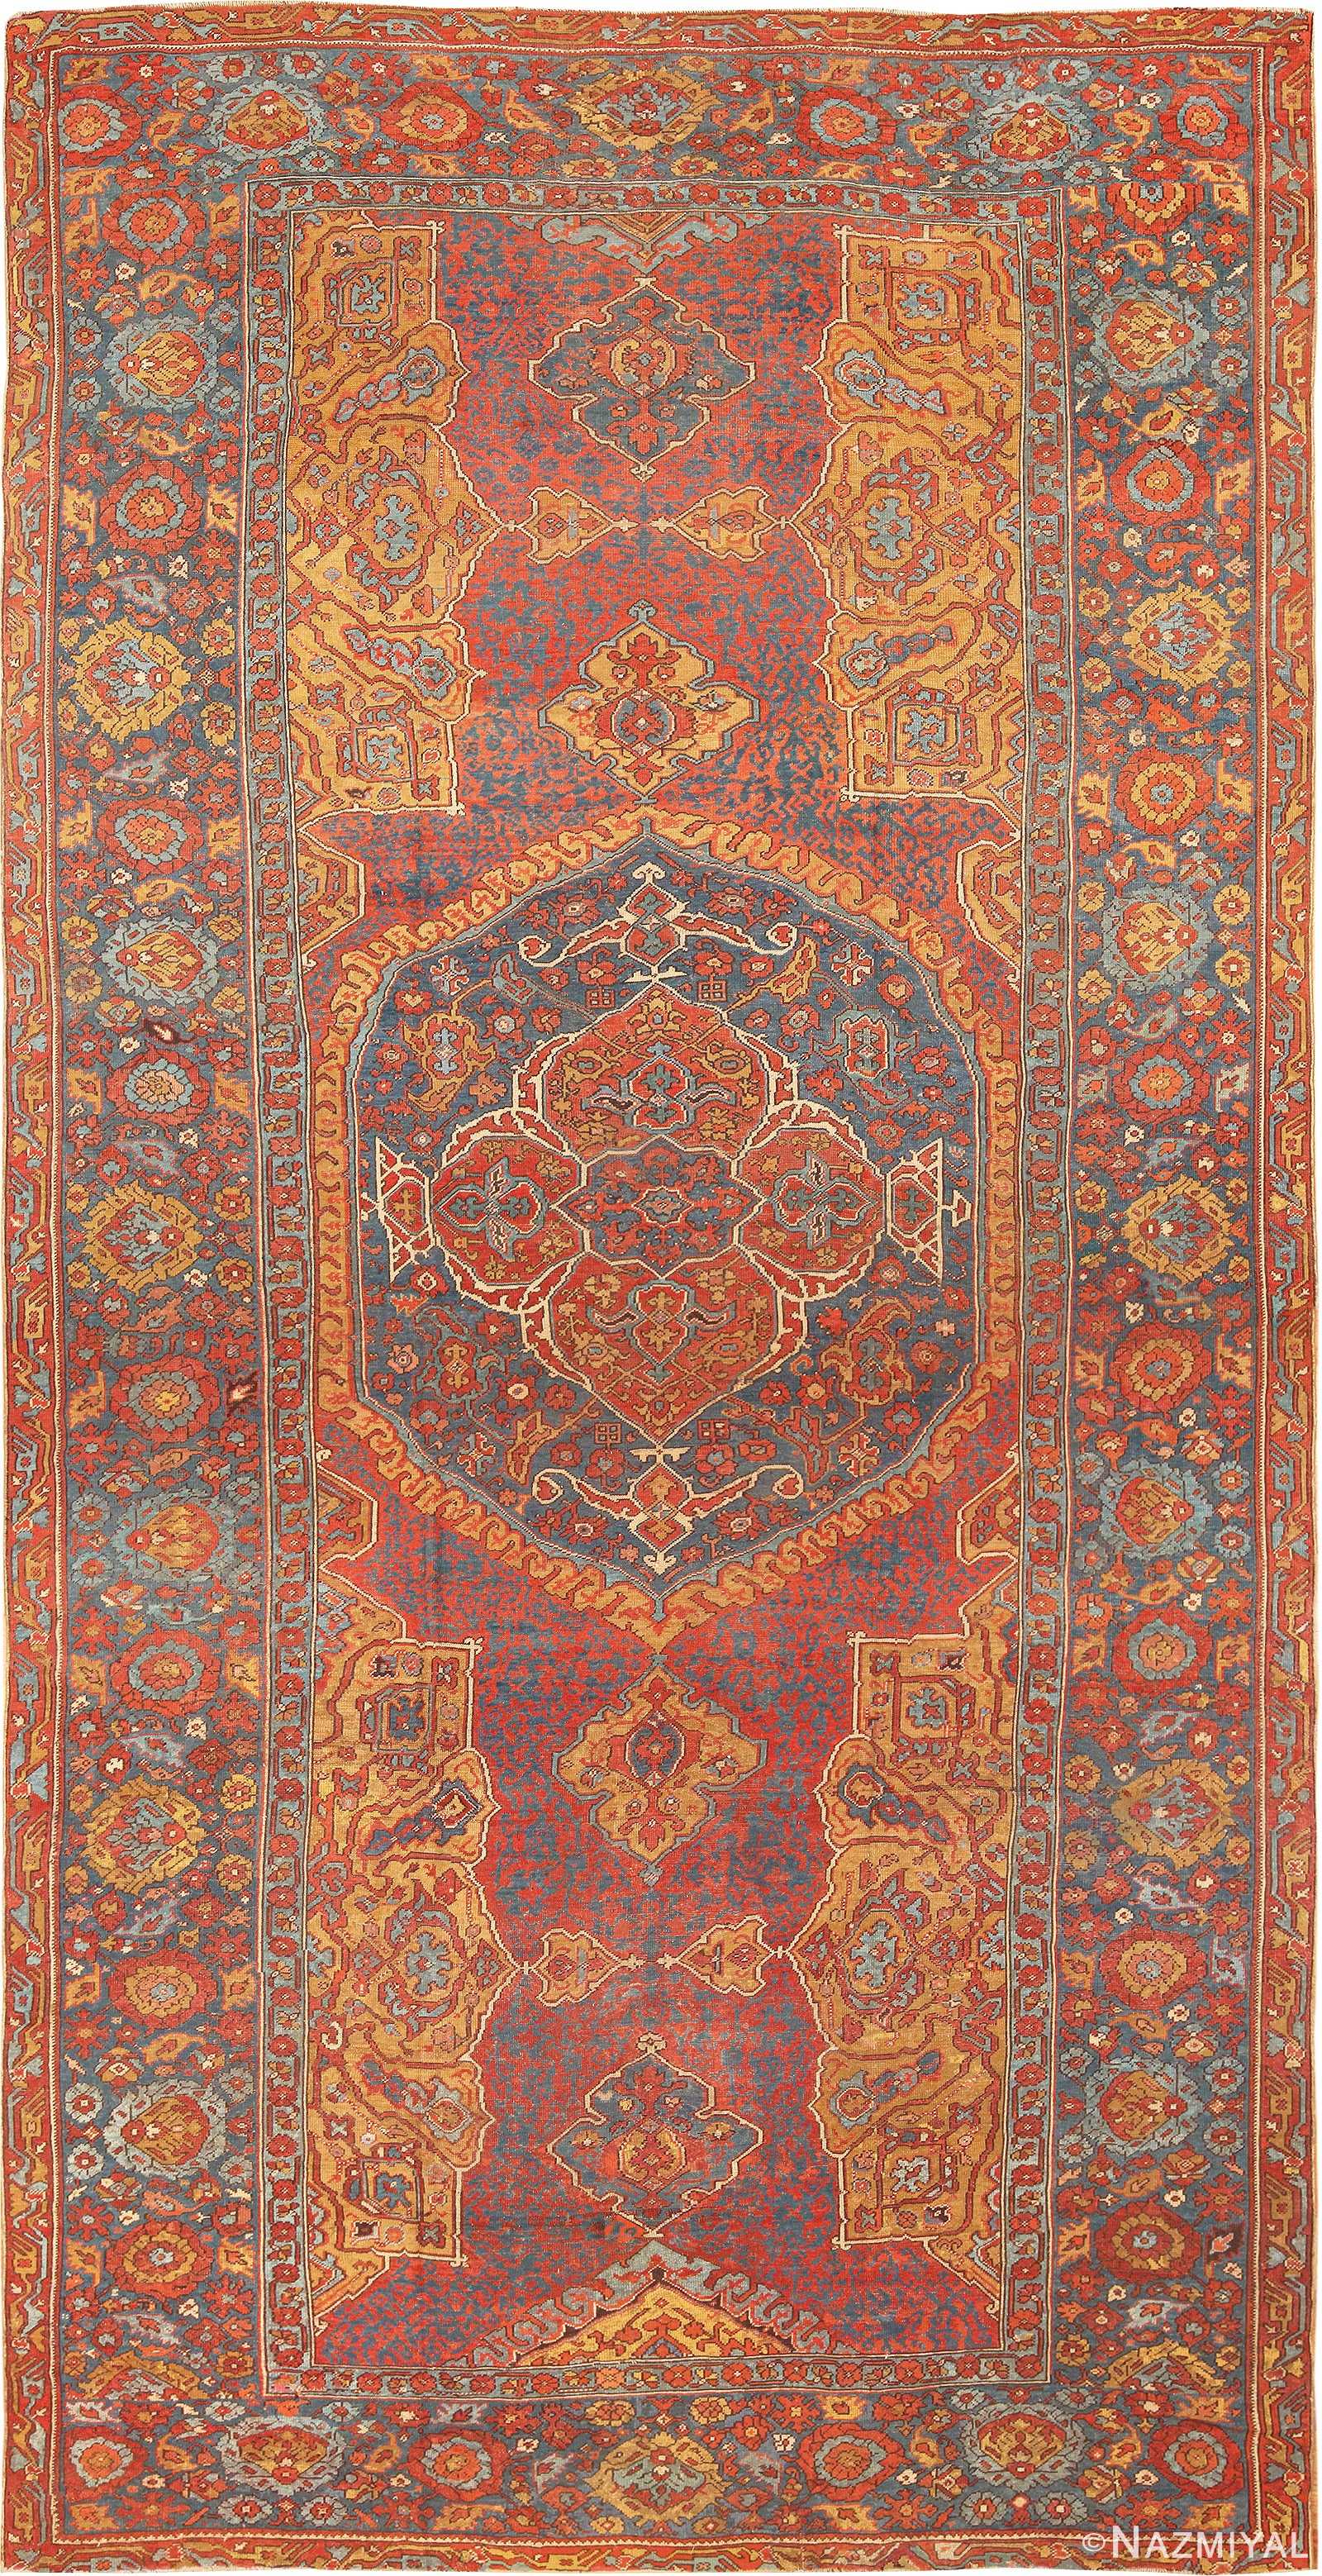 Antique 17th Century Turkish Smyrna Rug 70267 from Nazmiyal Antique Rugs in NYC